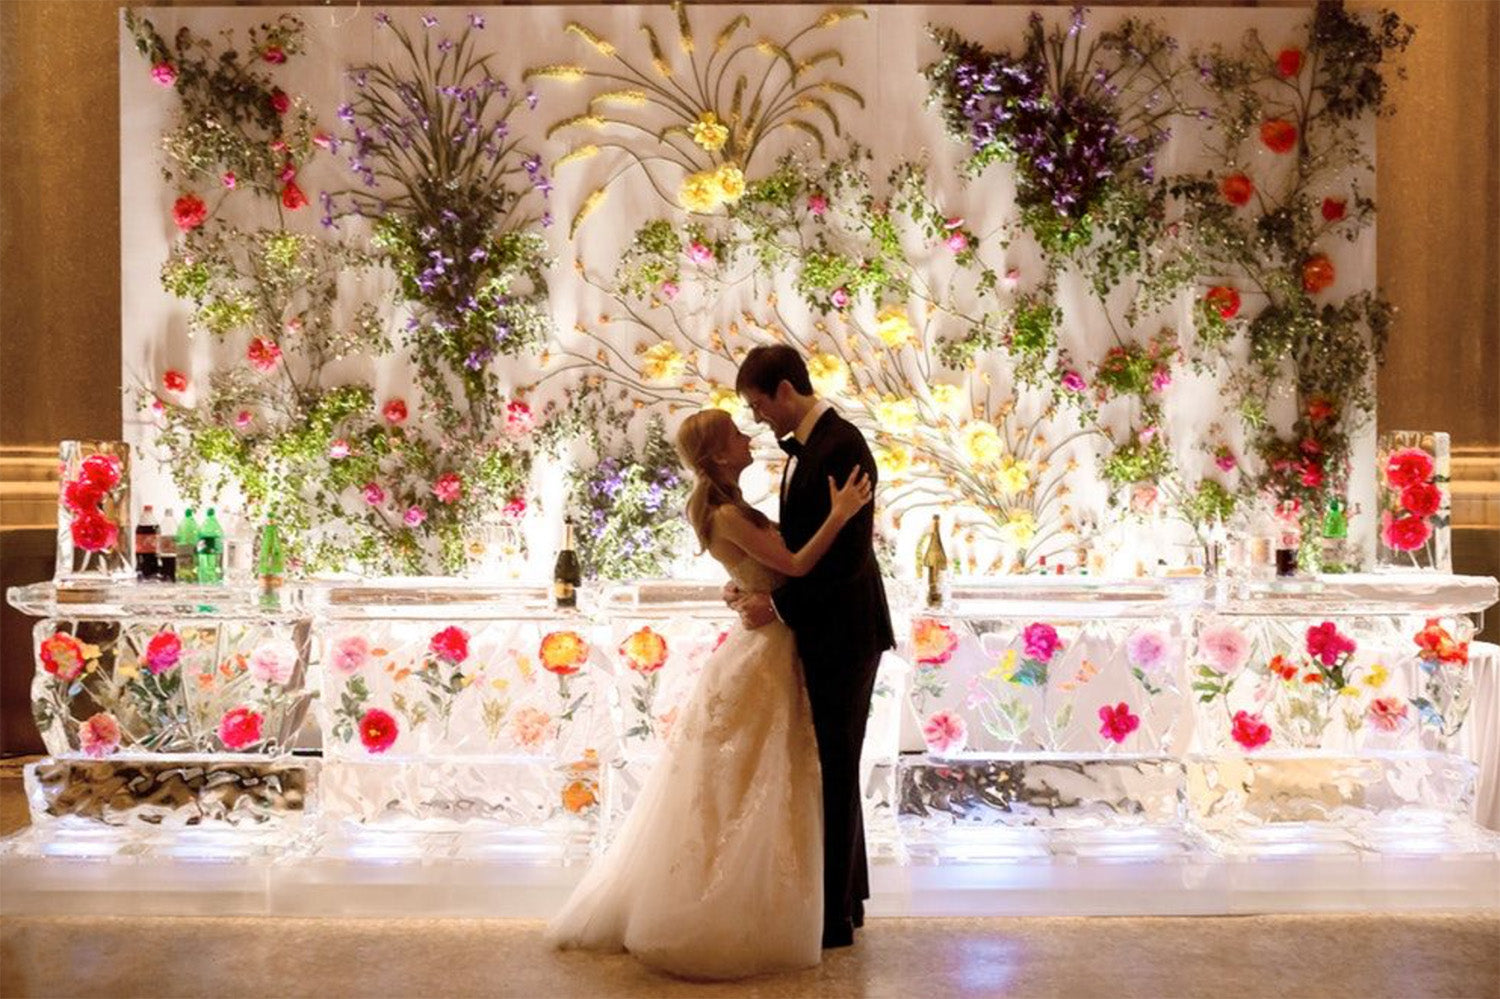 A bride and groom kiss in front of a luxurious floral backdrop.